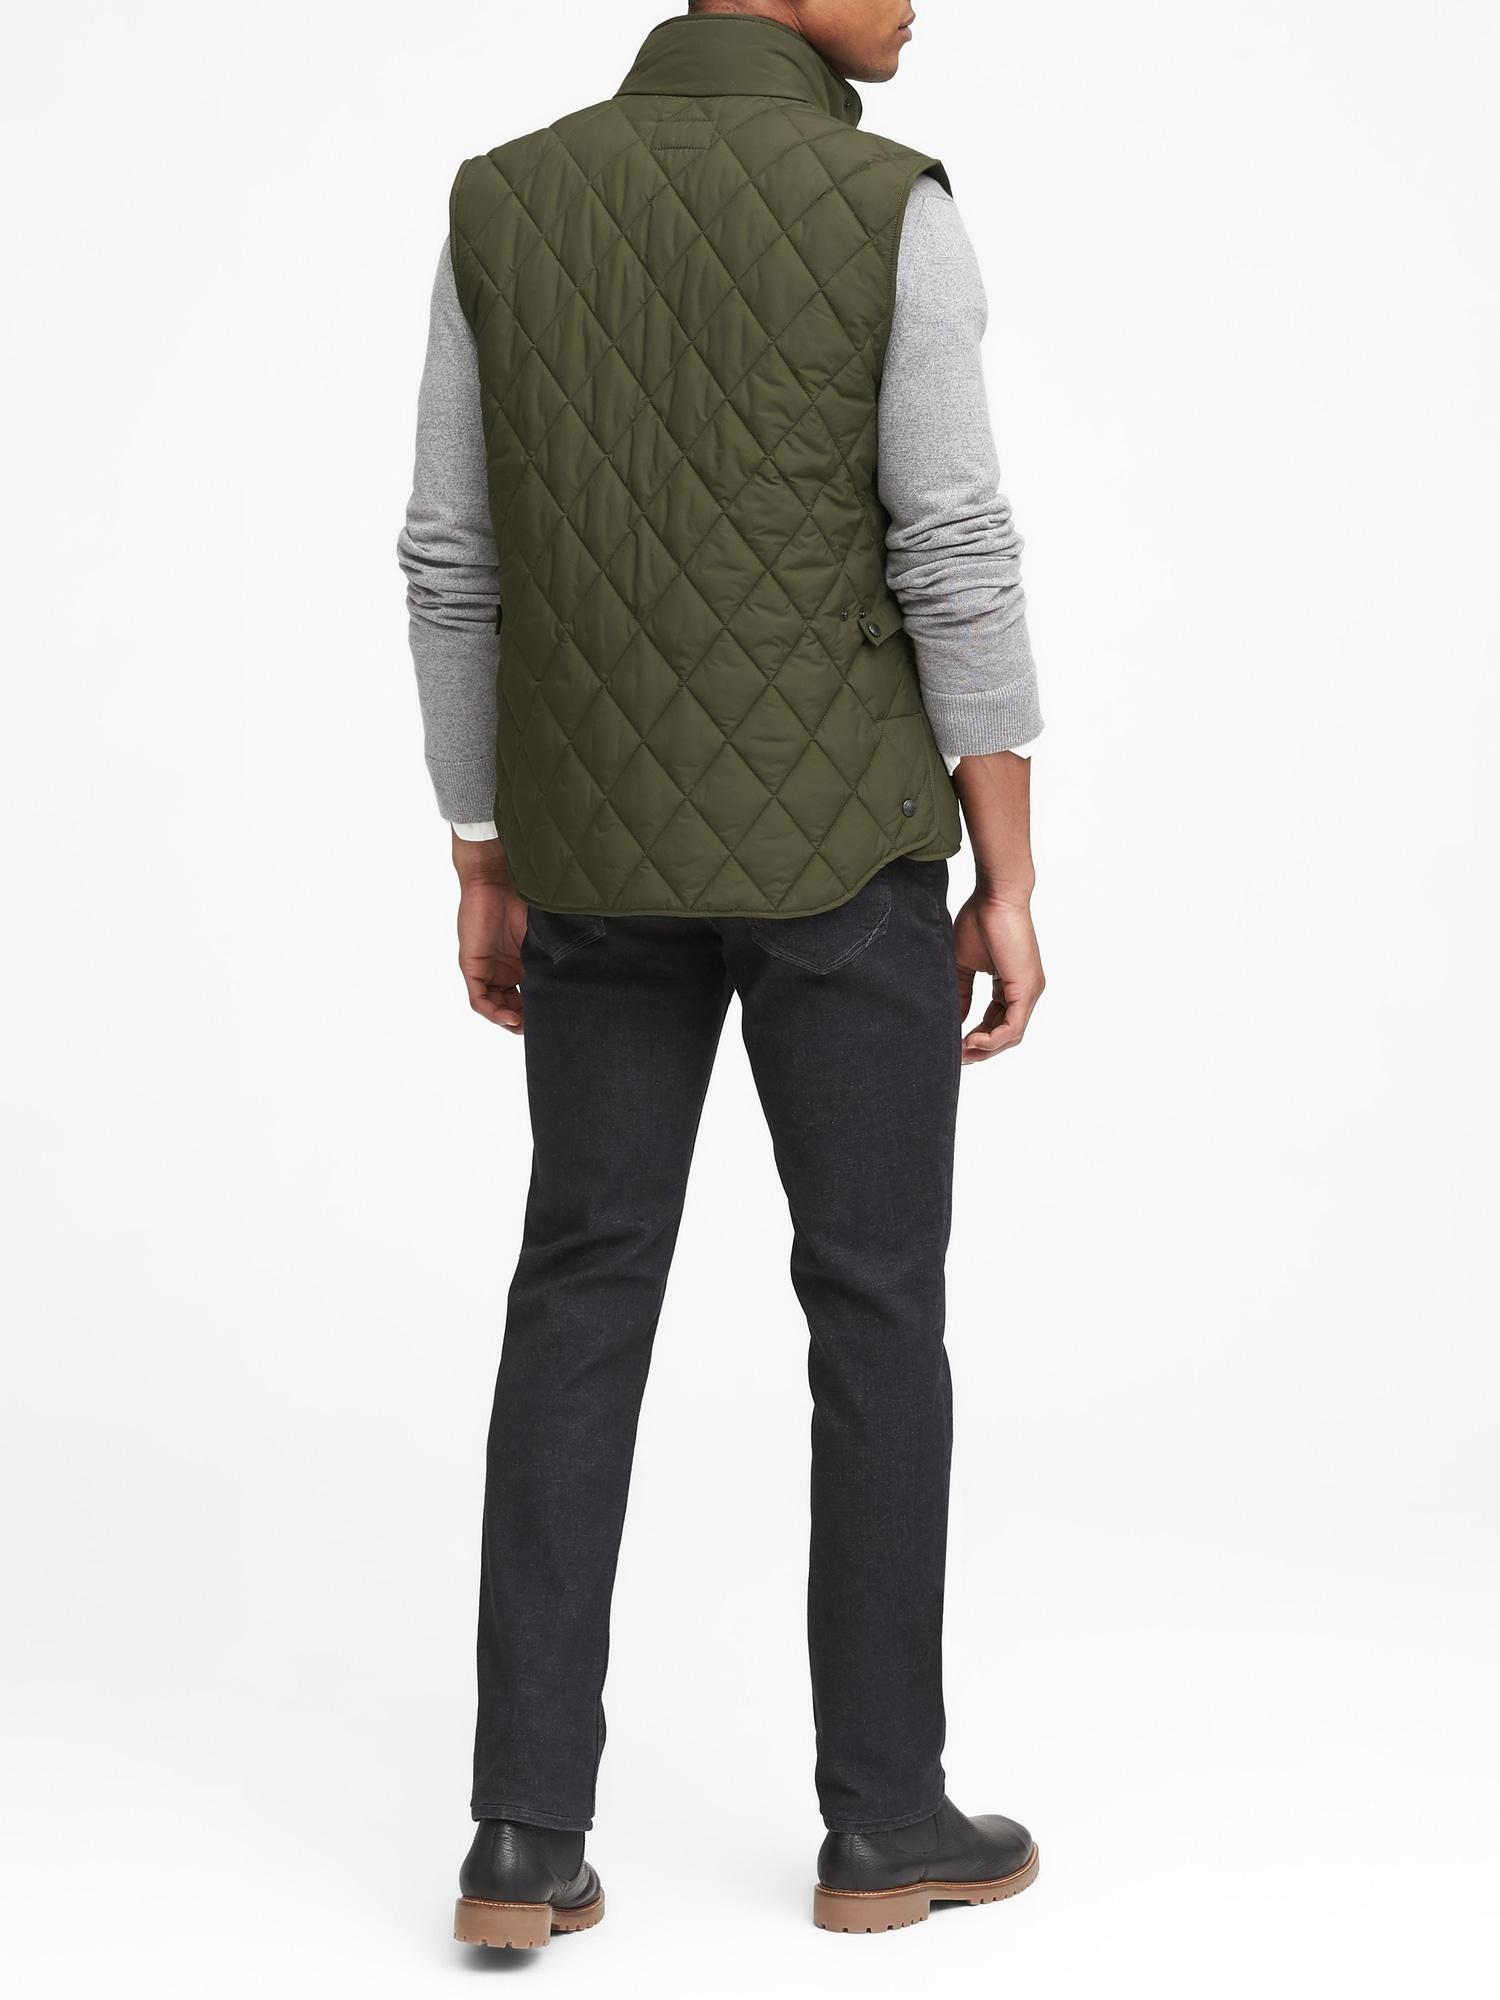 Banana Republic Synthetic Water-resistant Quilted Vest in Olive Green (Green)  for Men - Lyst